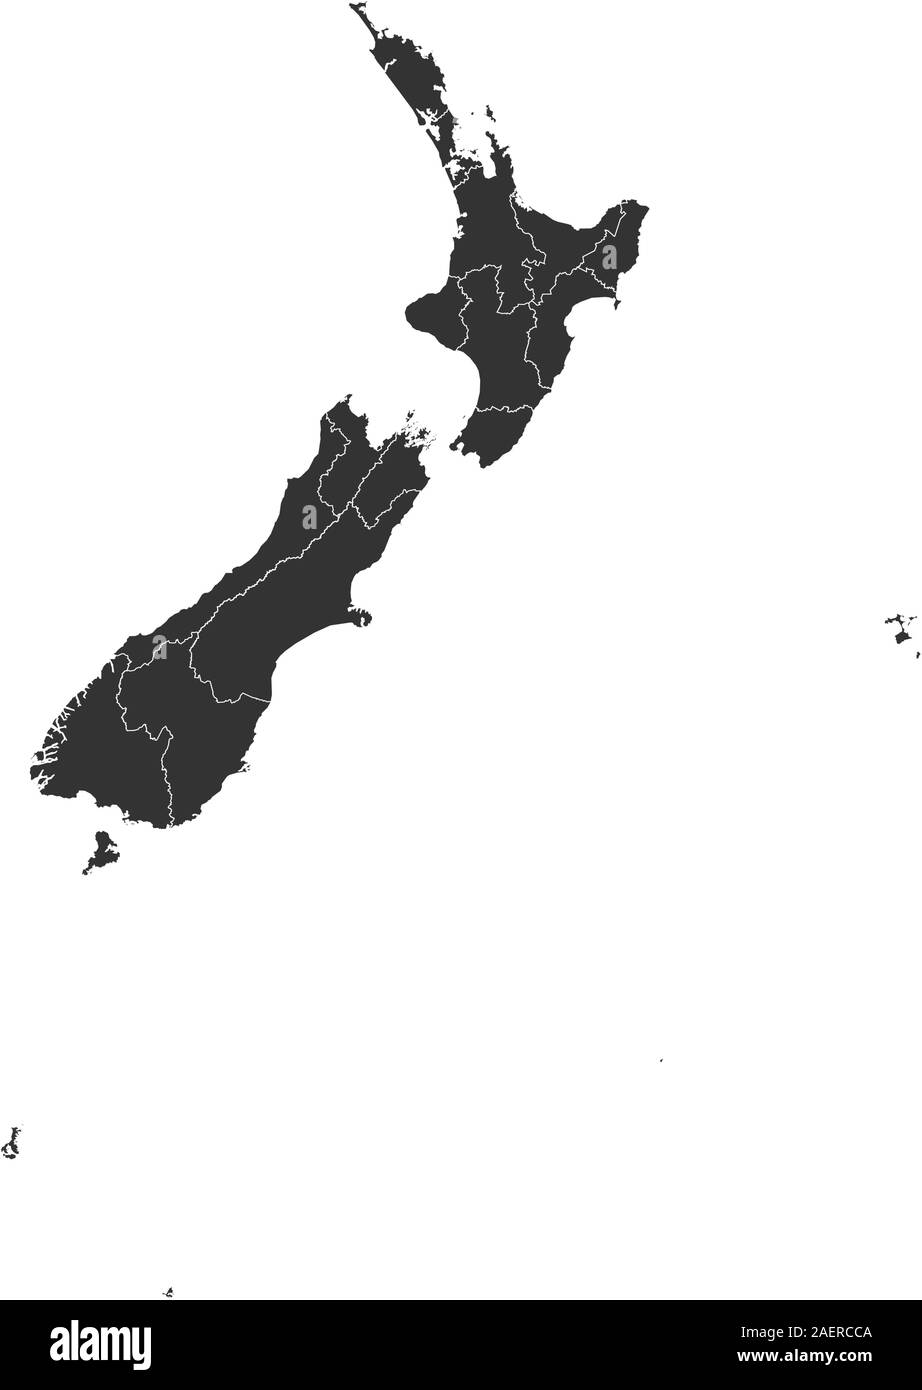 Modern New Zealand political map vector illustration. Gray color. Island country in pacific ocean. Stock Vector